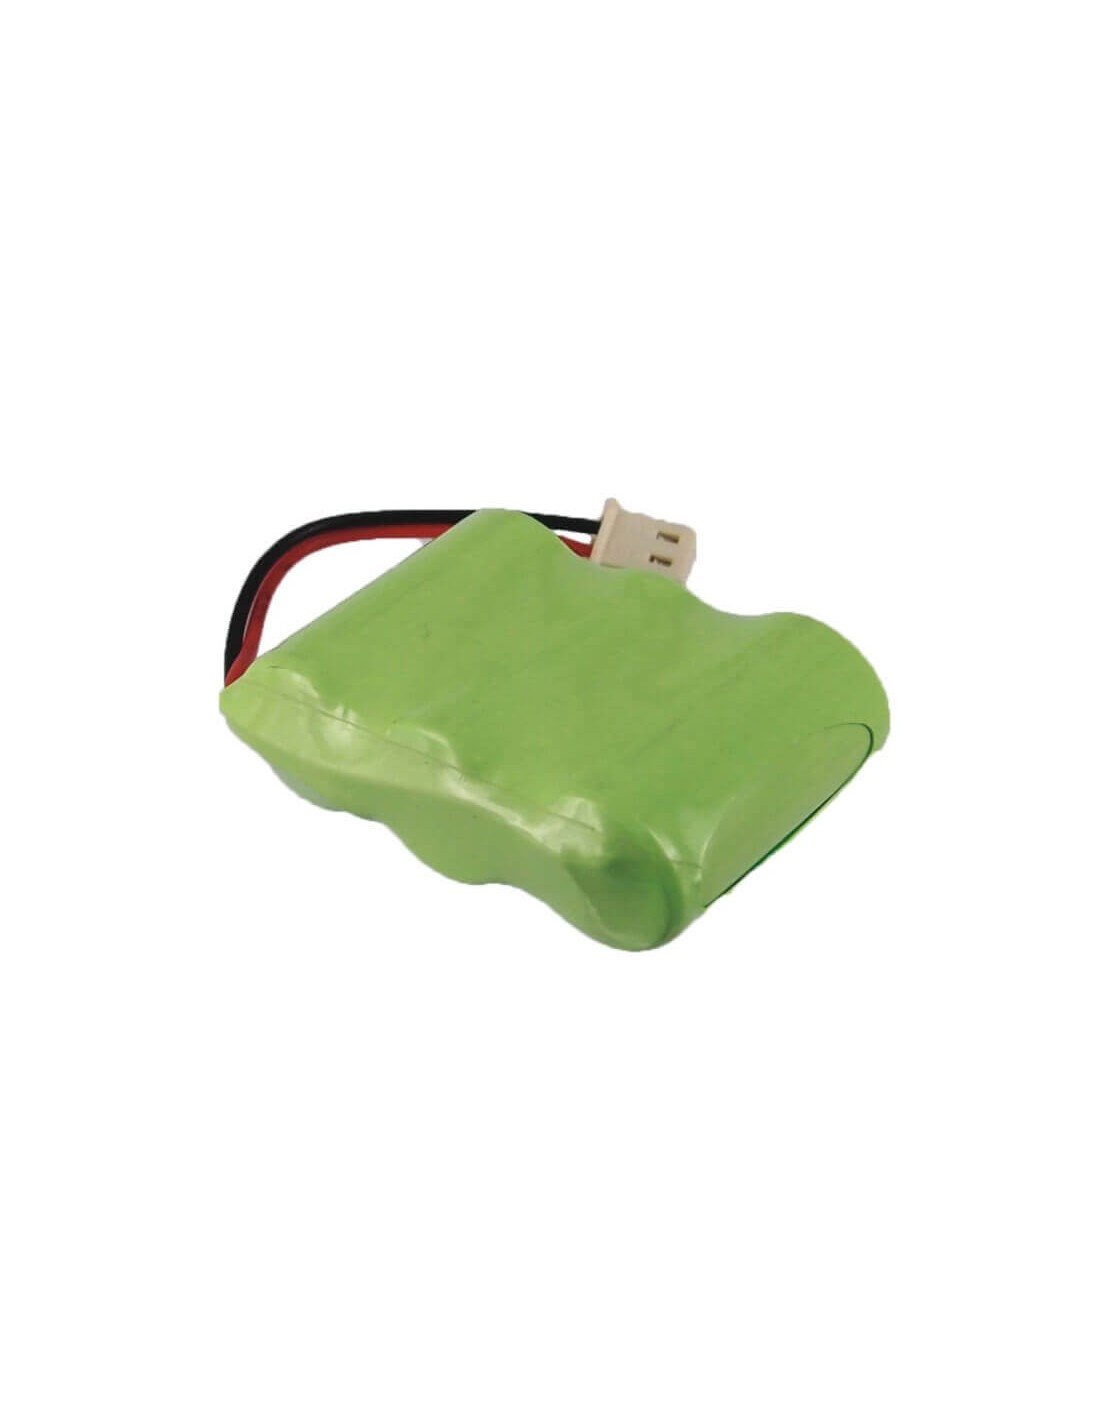 Battery for Extend-a-phone, 52189a, 52298d, 52298e, 52298f, 3.6V, 600mAh - 2.16Wh